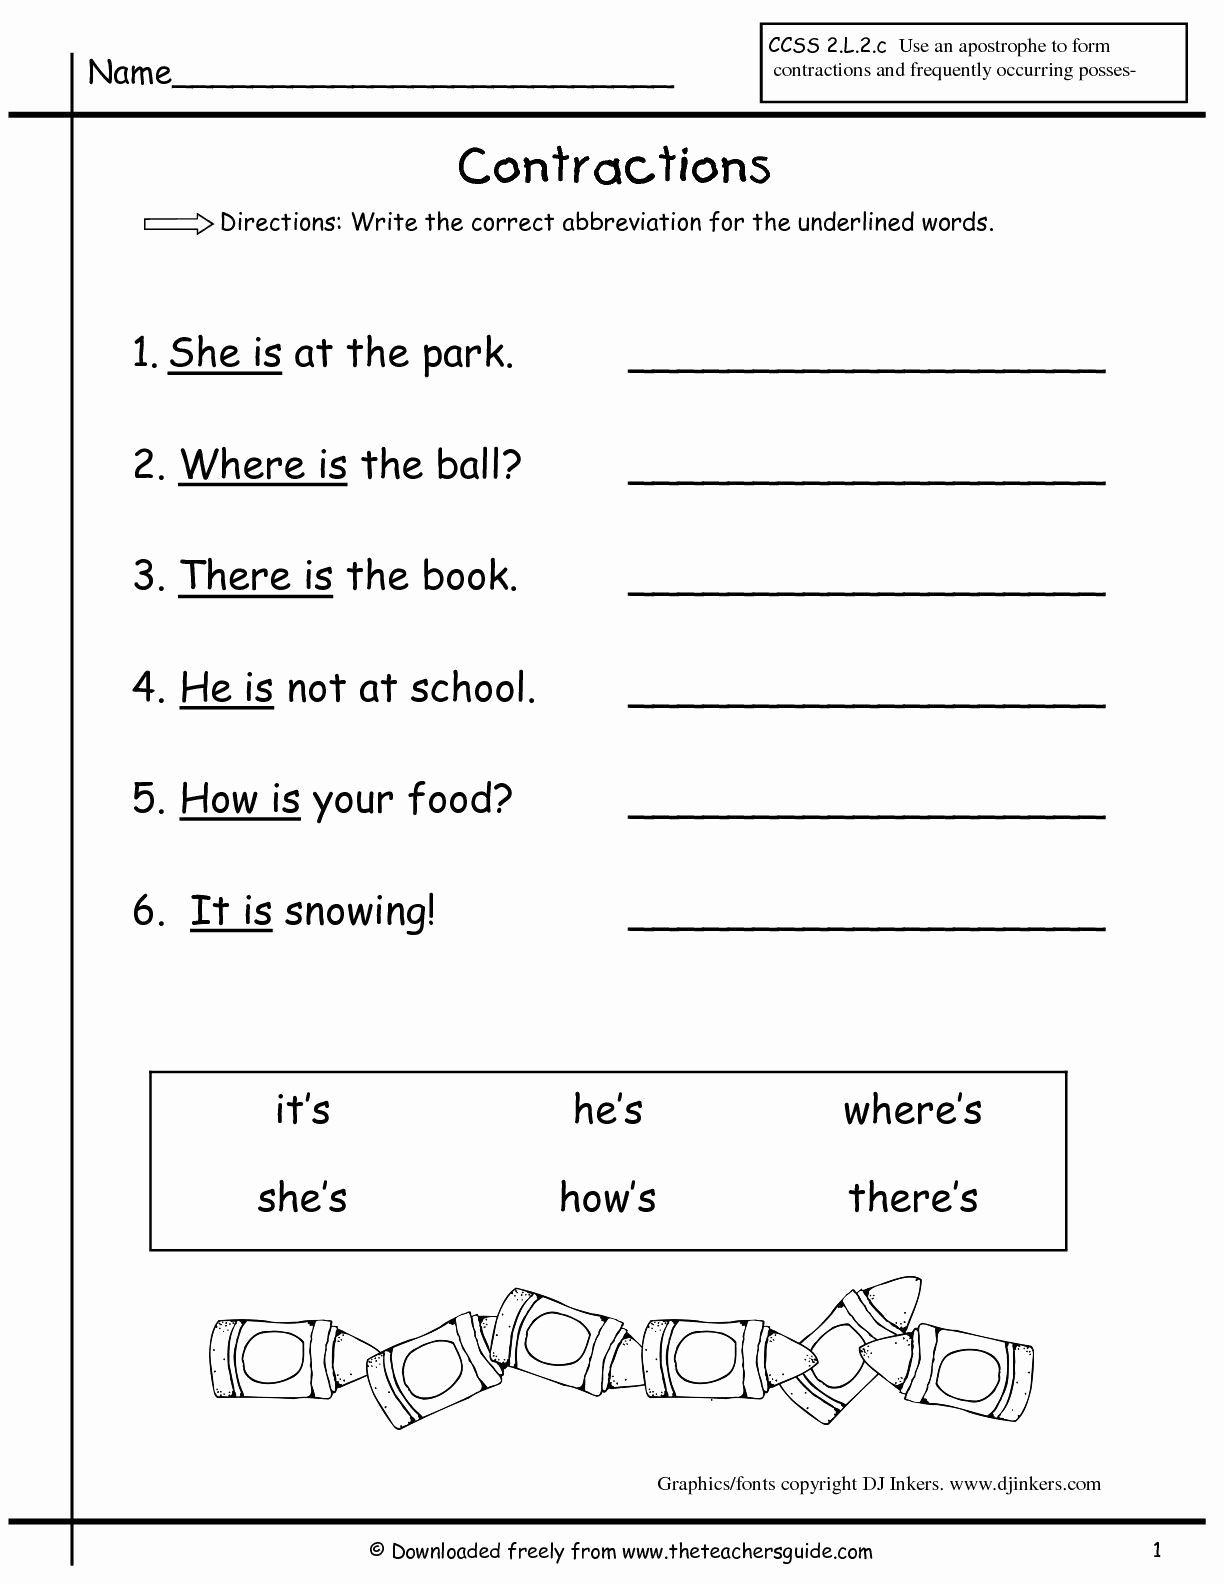 Second Grade Science Worksheets Free Second Grade Science Worksheets